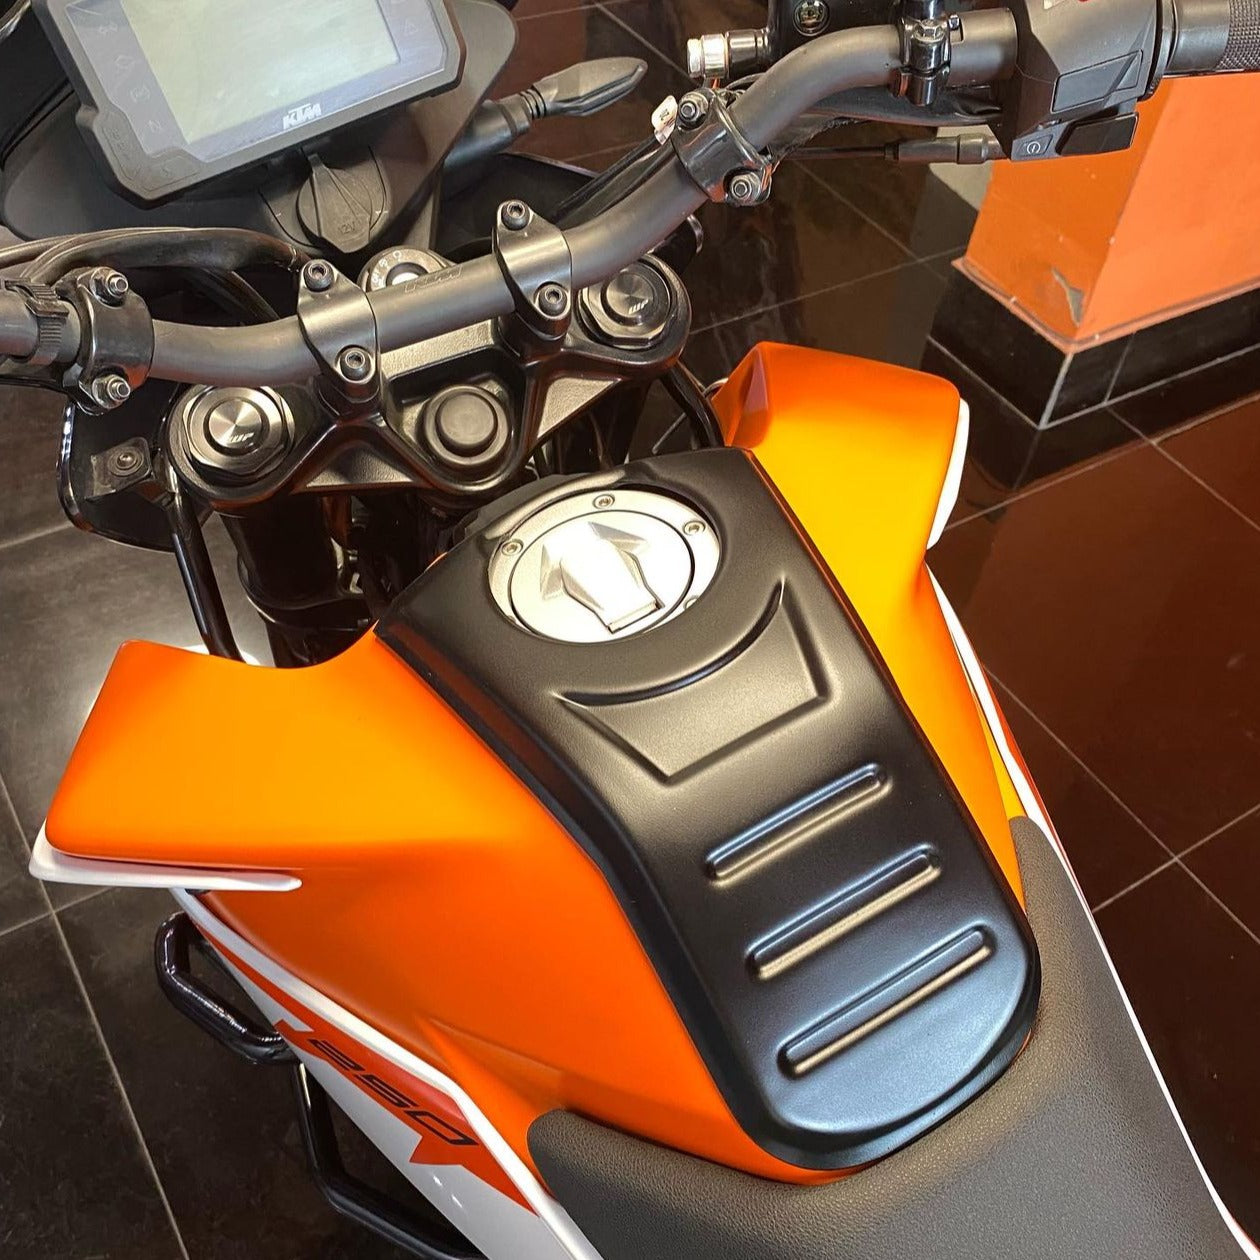 KTM Adventure Tank Protection | Best Tank Pad Cover | Tank Scratch Protection | Modified Looks | Fits KTM Adventure | Saiga Parts Modification Accessories